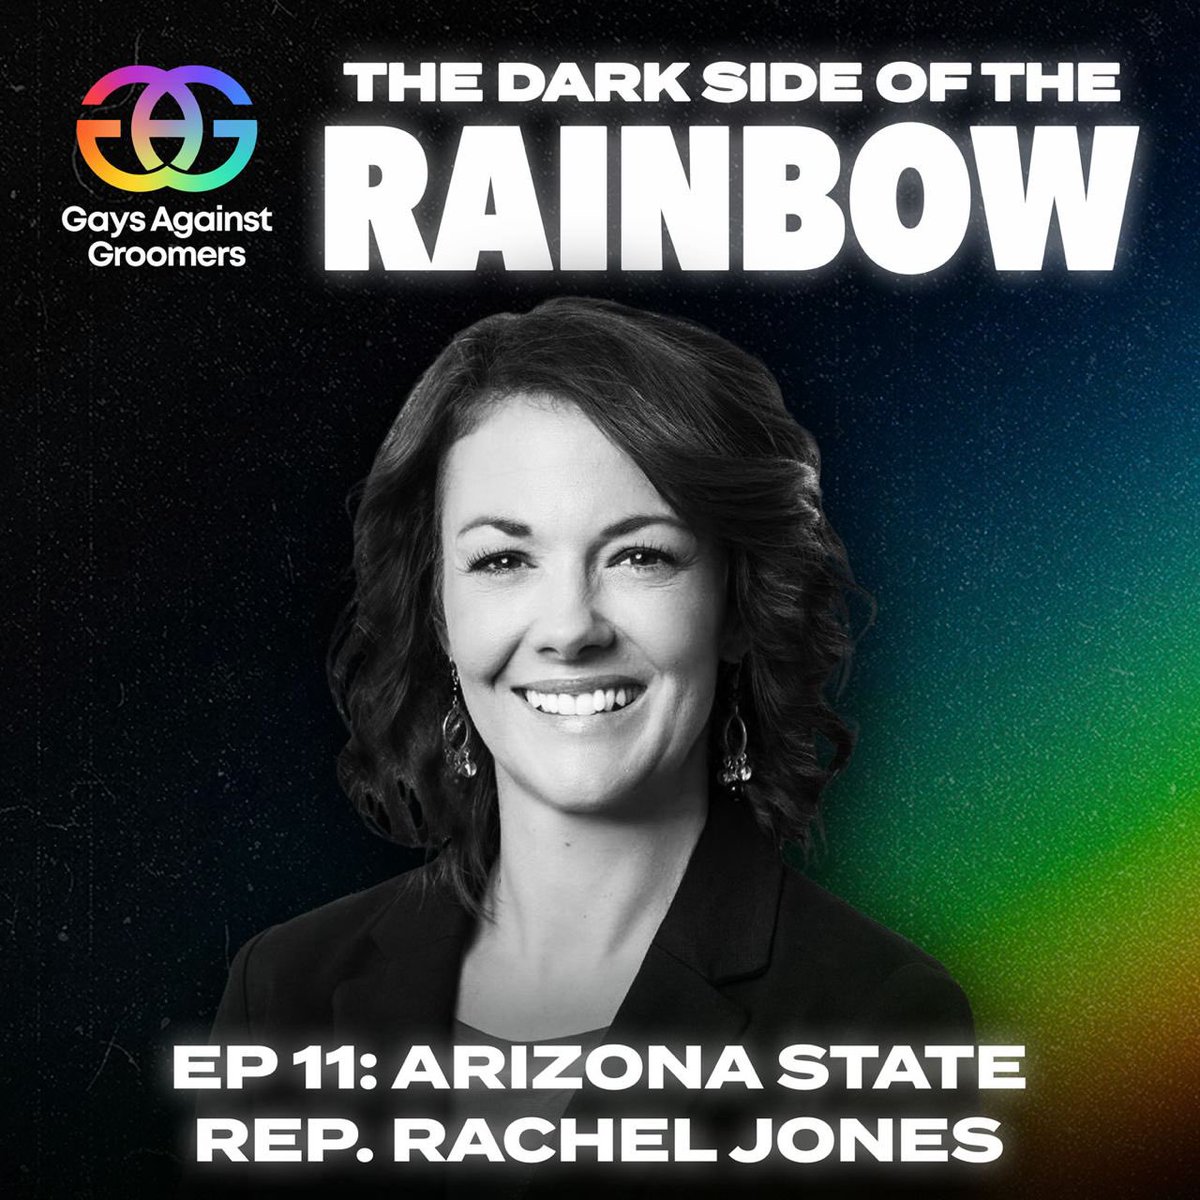 🔥🎙️OUT NOW: Episode 11 of our podcast, The Dark Side of the Rainbow, featuring Arizona State Rep Rachel Jones (@RJ4arizona) Highlighting the event wherein a drag queen managed to sneak into the Capitol, we speak with Rachel, who foresees the devastating impact of the present…